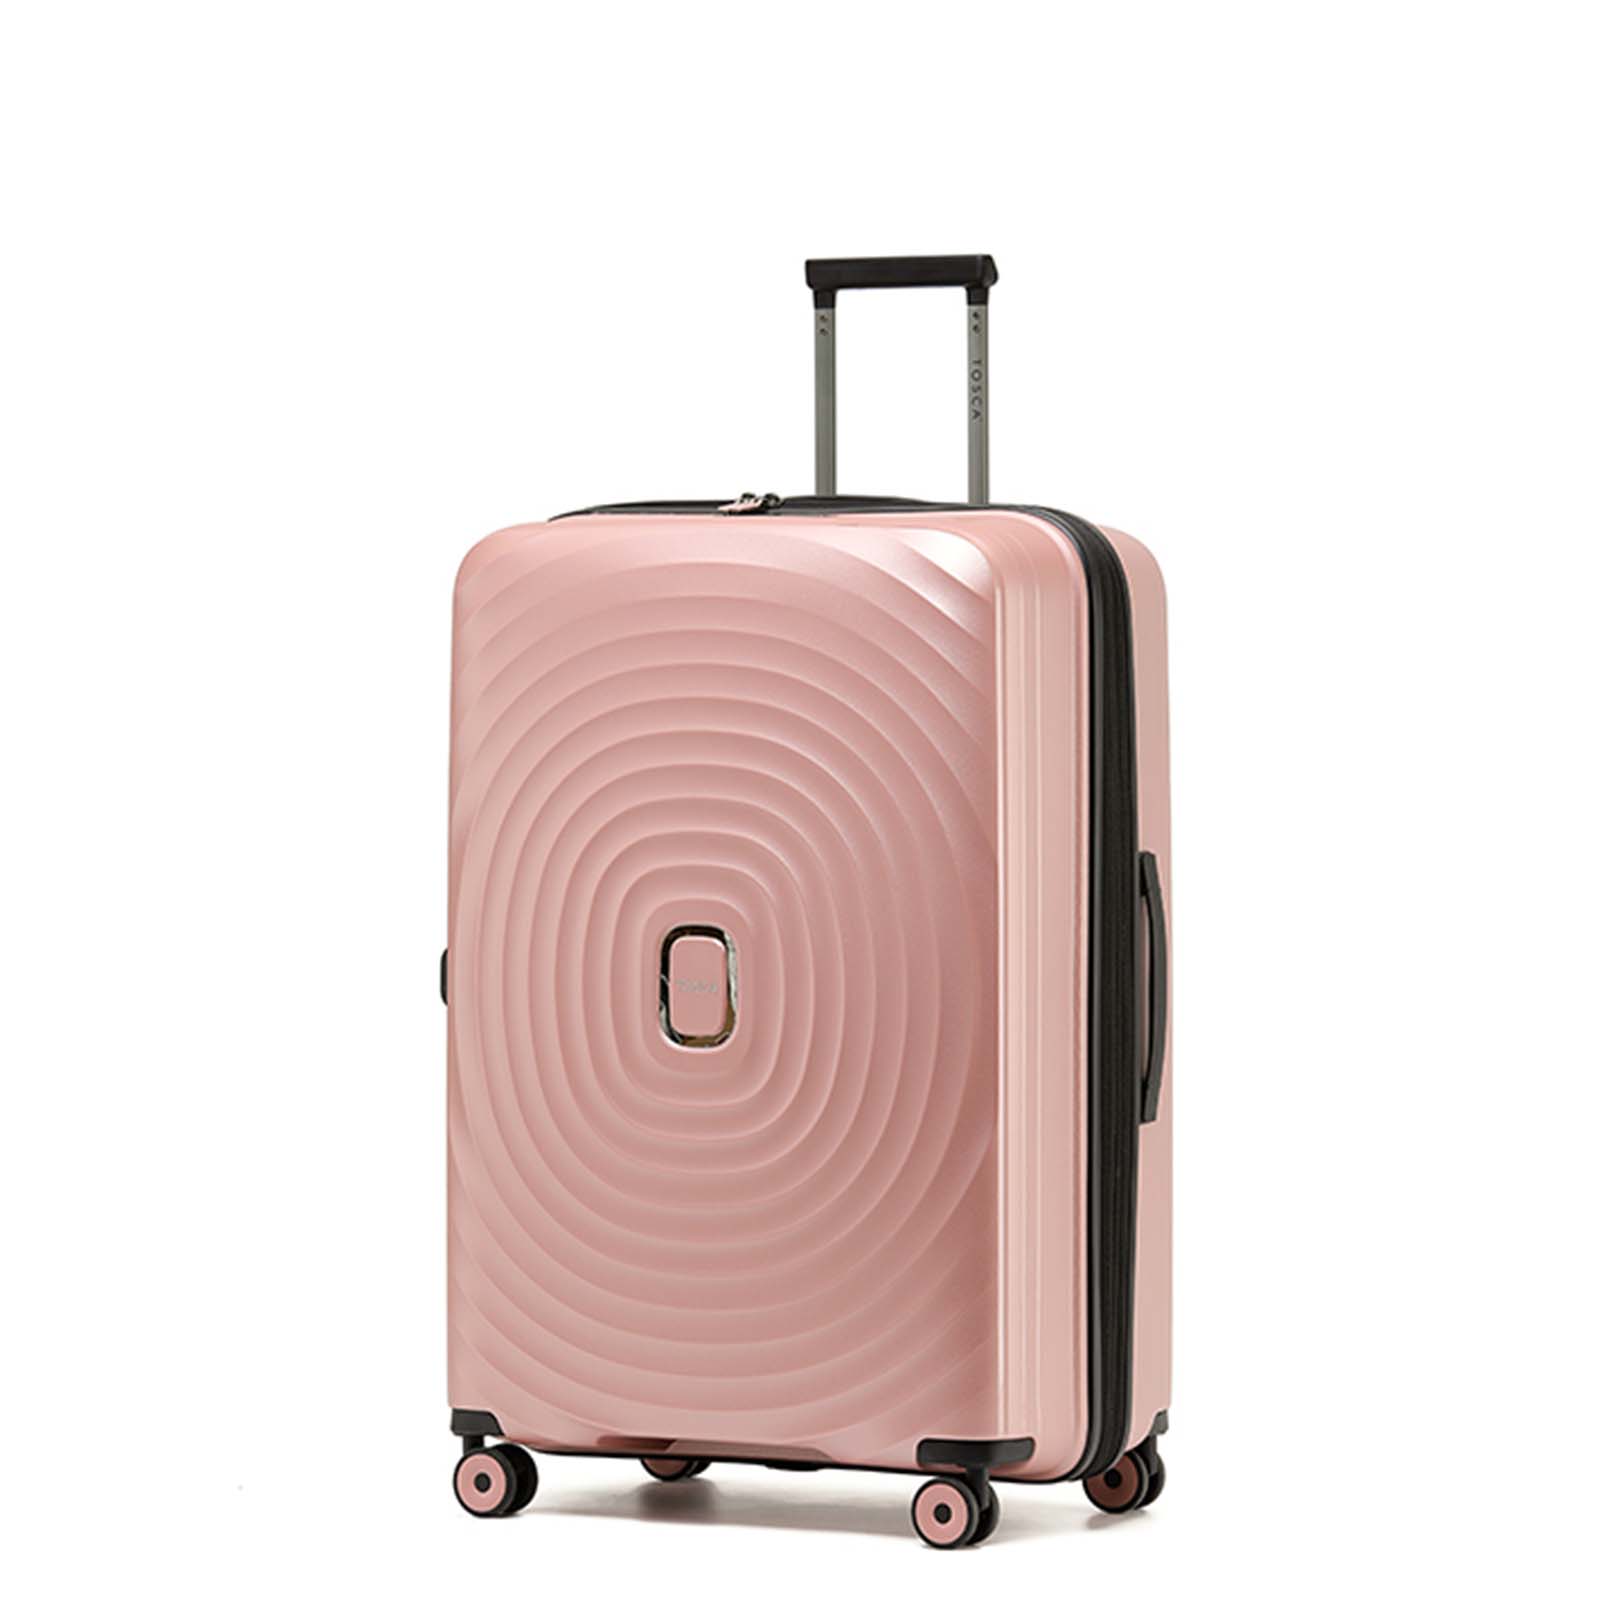 tosca-eclipse-4-wheel-77cm-large-suitcase-rose-gold-front-angle